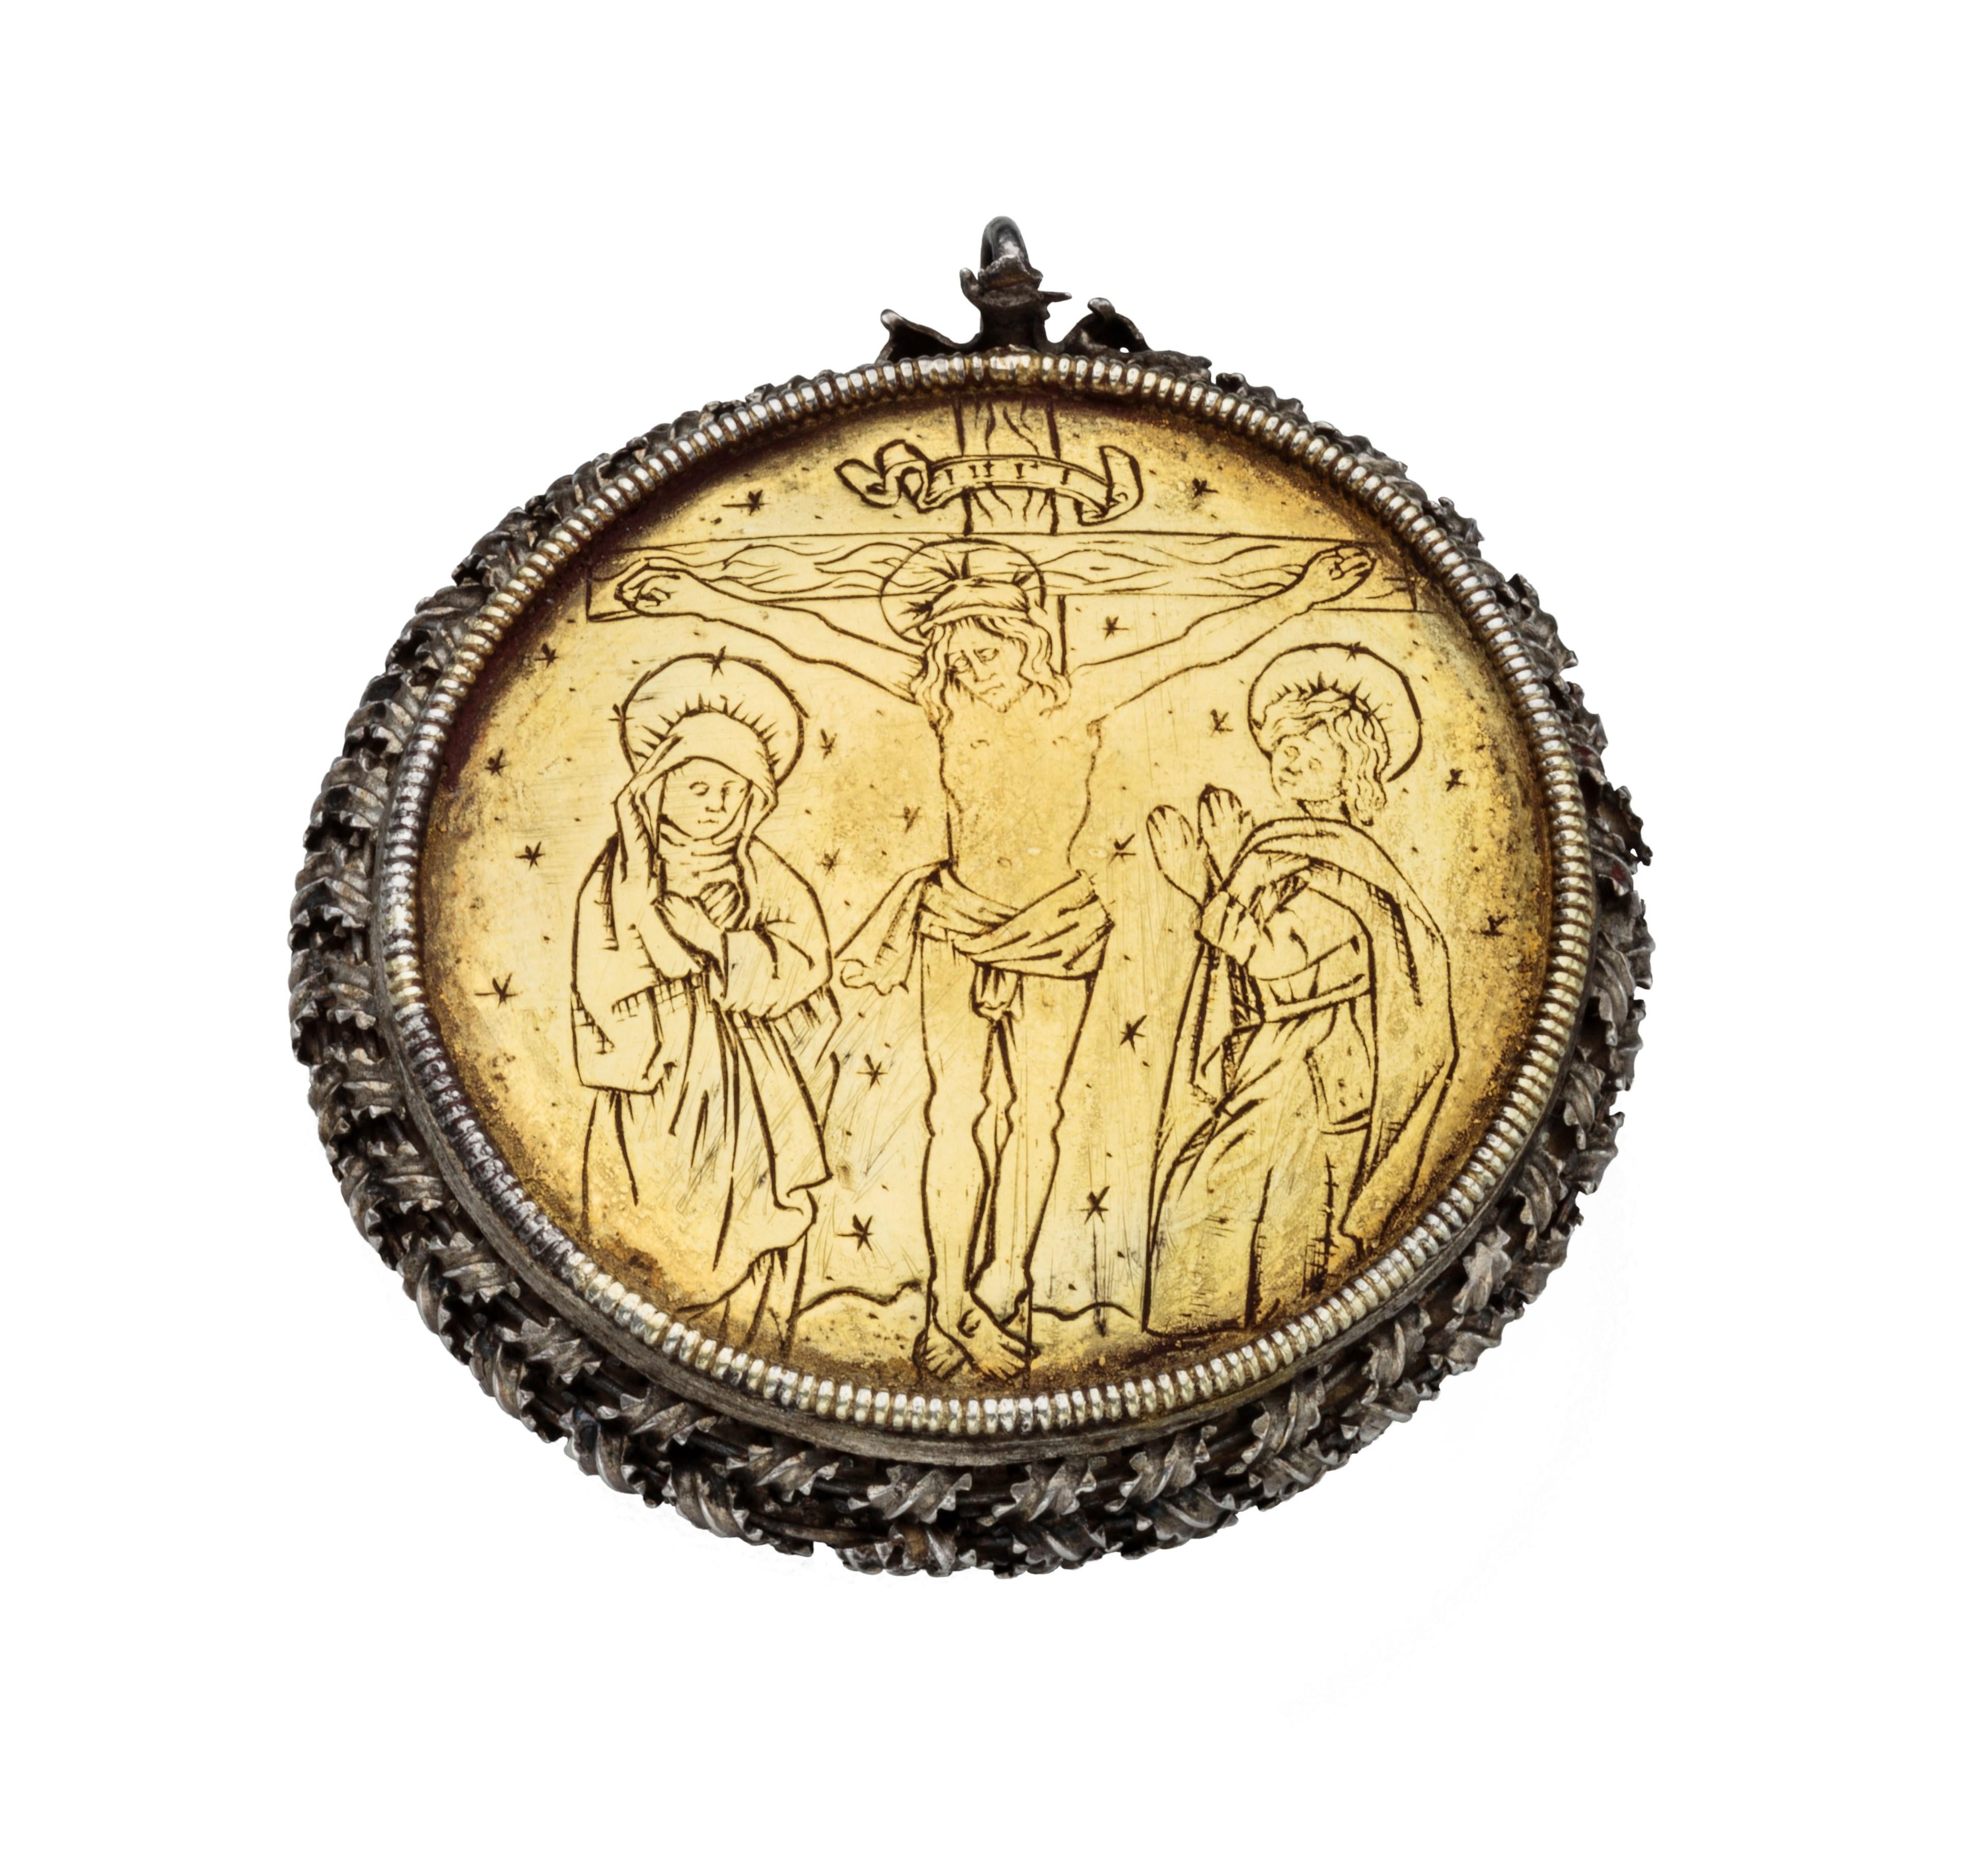 Reliquary Pendant with St. Catherine
Capsule: Transylvania; medallion: Germany, c. 1475–1500 
Silver, gilded silver 
Weight 49.6 grams; dimensions 57 × 51 × 18 mm, opens to 72 mm 

The surfaces of this small reliquary pendant create a delightful